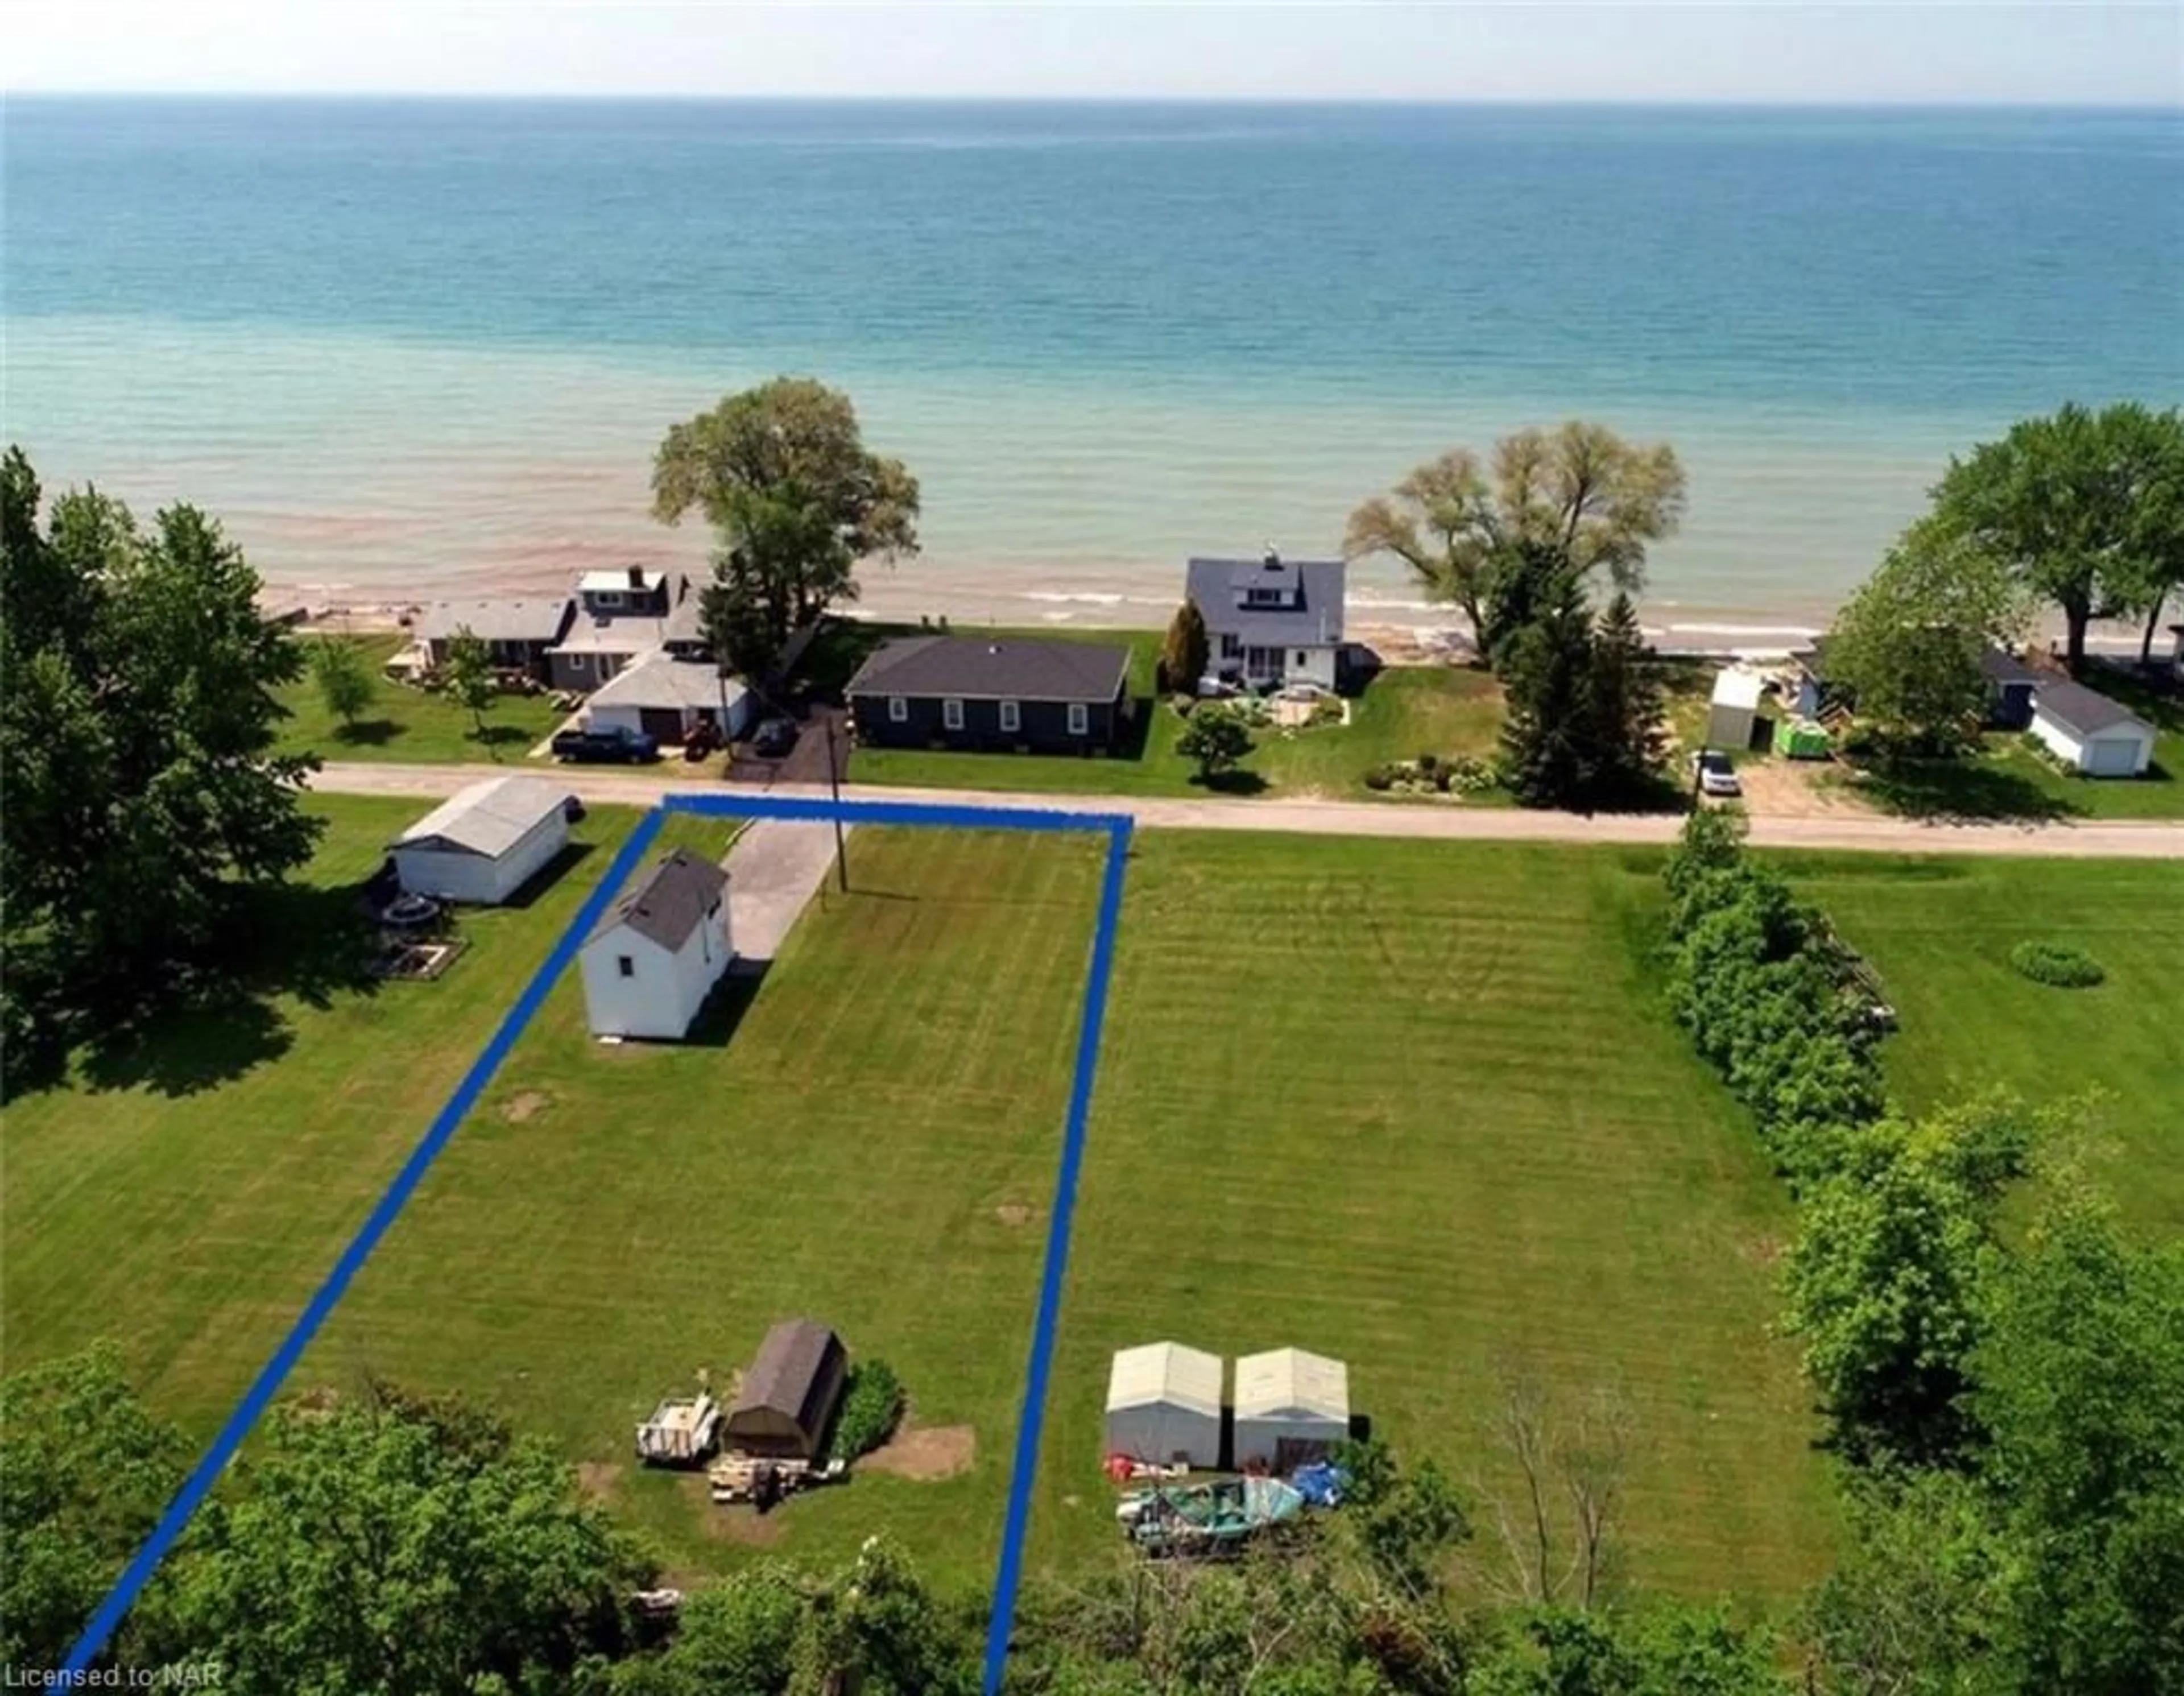 Lakeview for 11521 Beach Rd, Wainfleet Ontario L0S 1V0